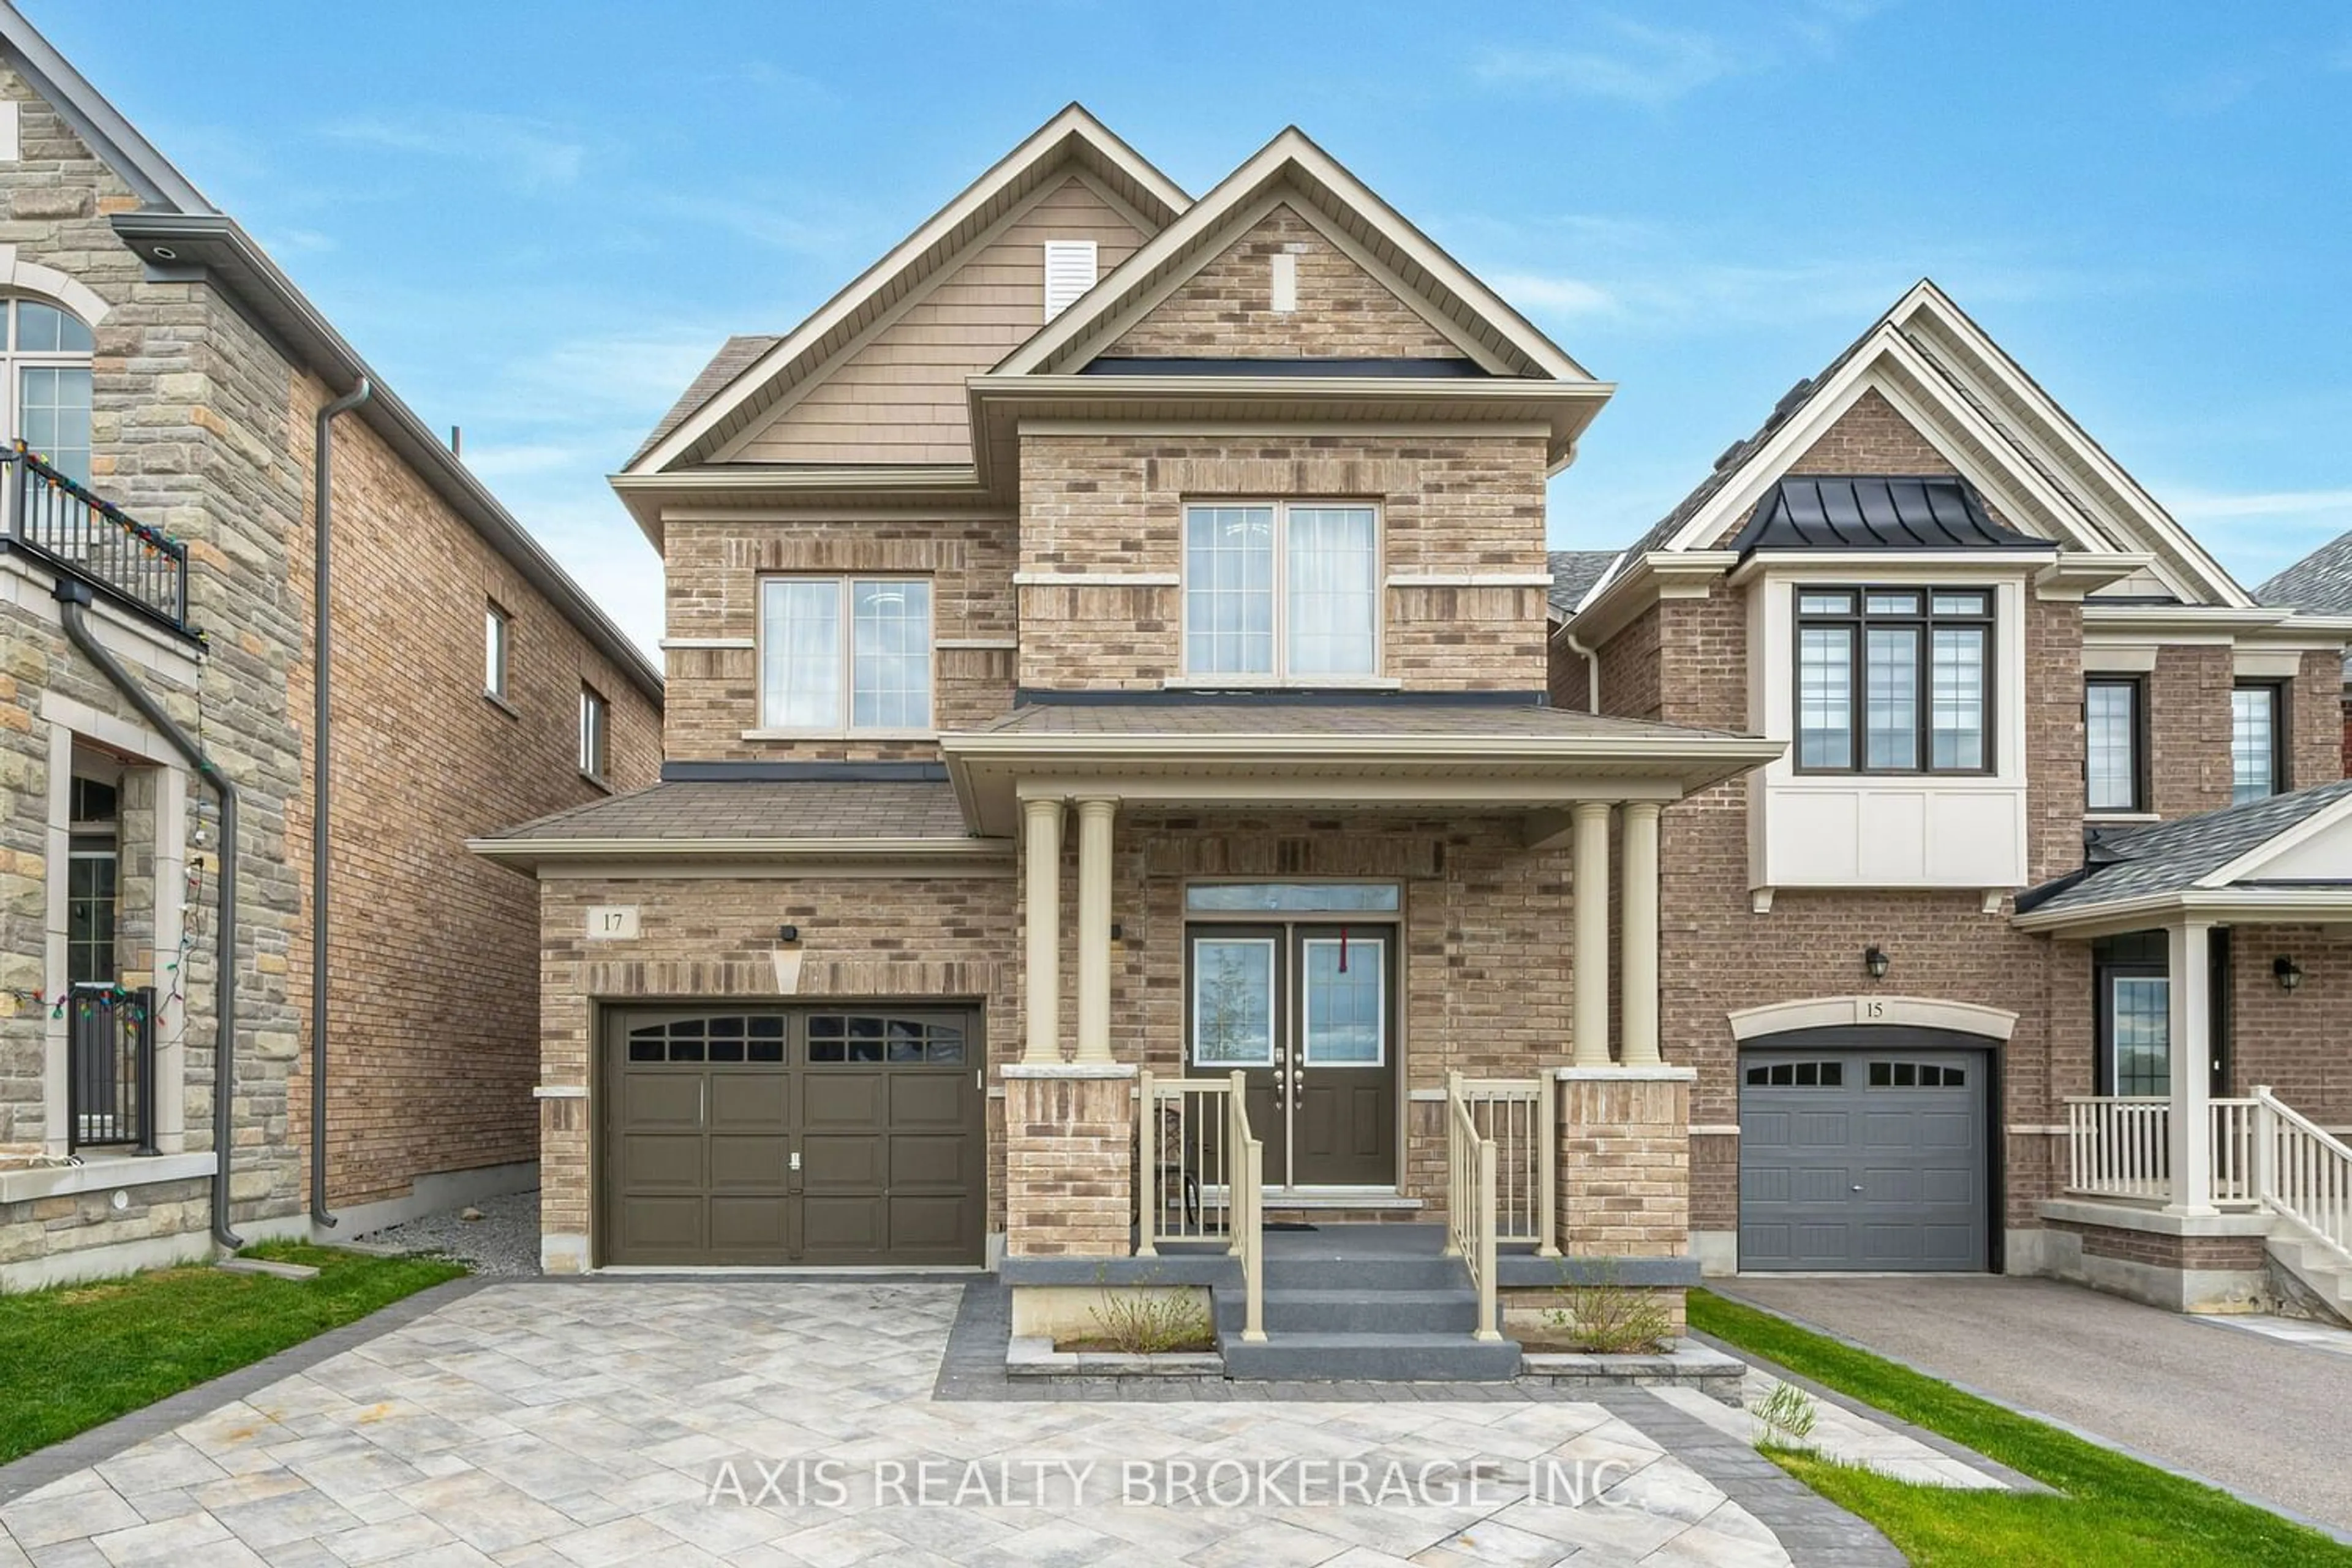 Home with brick exterior material for 17 Grinnel Rd, East Gwillimbury Ontario L9N 0X5